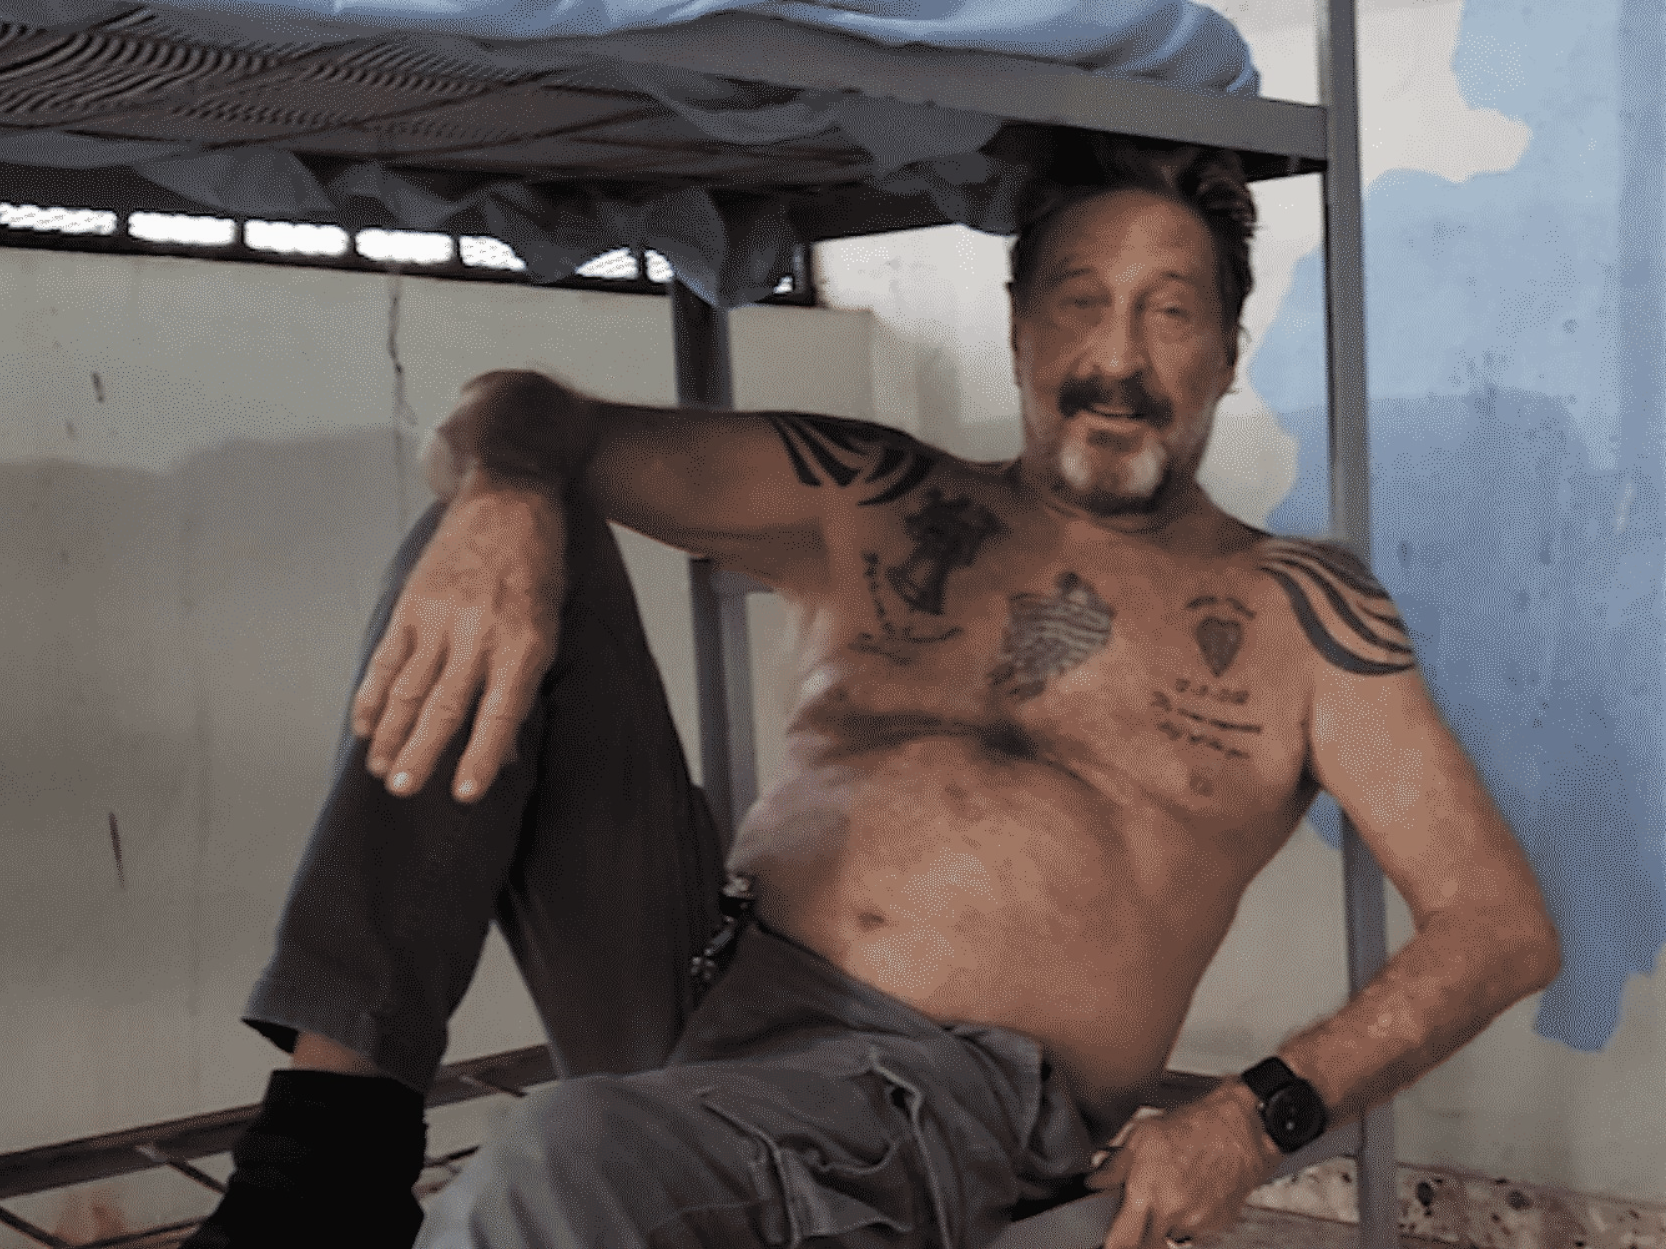 John McAfee, pictured here in a prison cell in the Caribbean, was found dead in a Spanish prison cell on 23 June, 2021